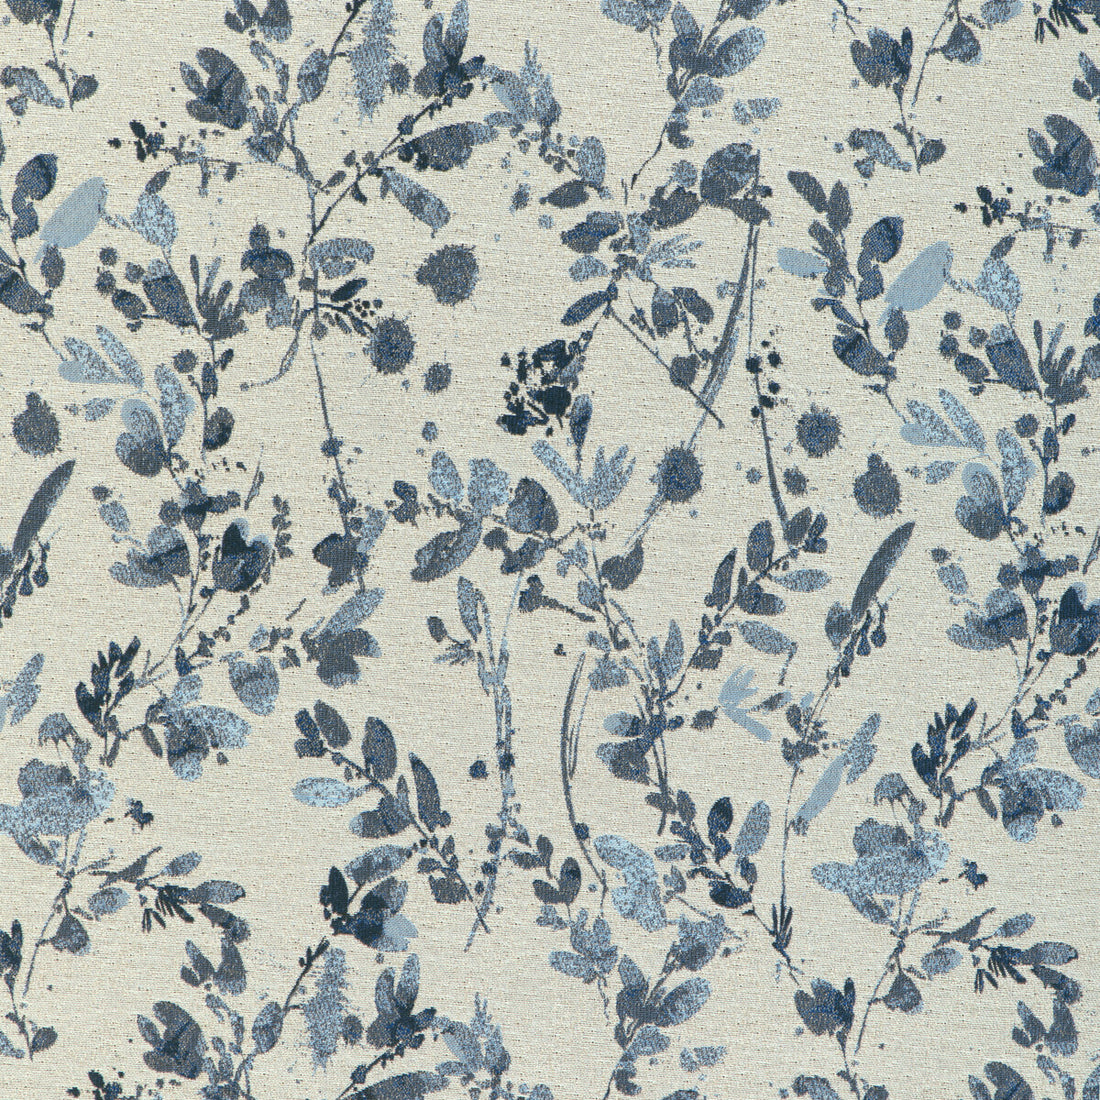 Bayview fabric in harbor color - pattern 37072.155.0 - by Kravet Contract in the Chesapeake collection